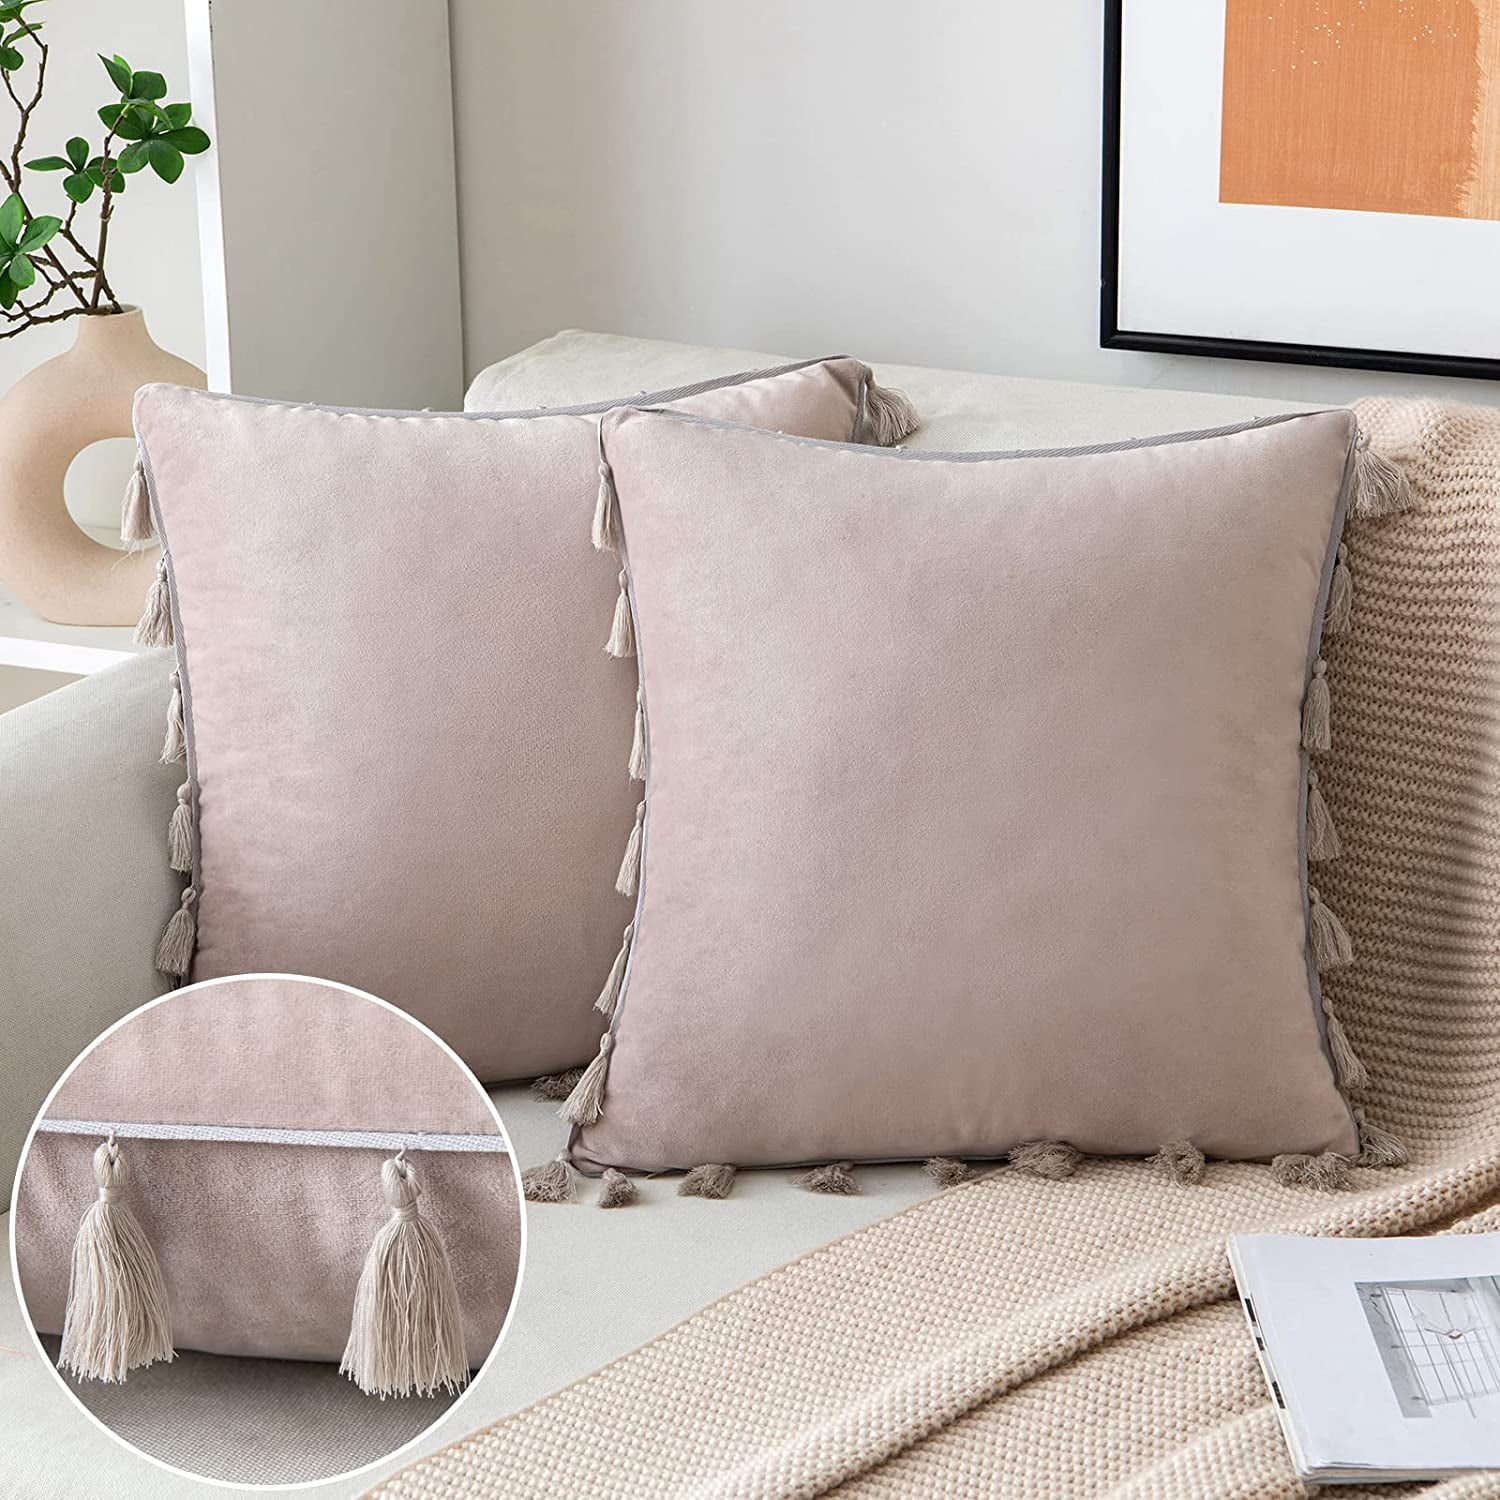 Inyahome Decorative Soft Velvet Throw Pillow Covers Solid Plain